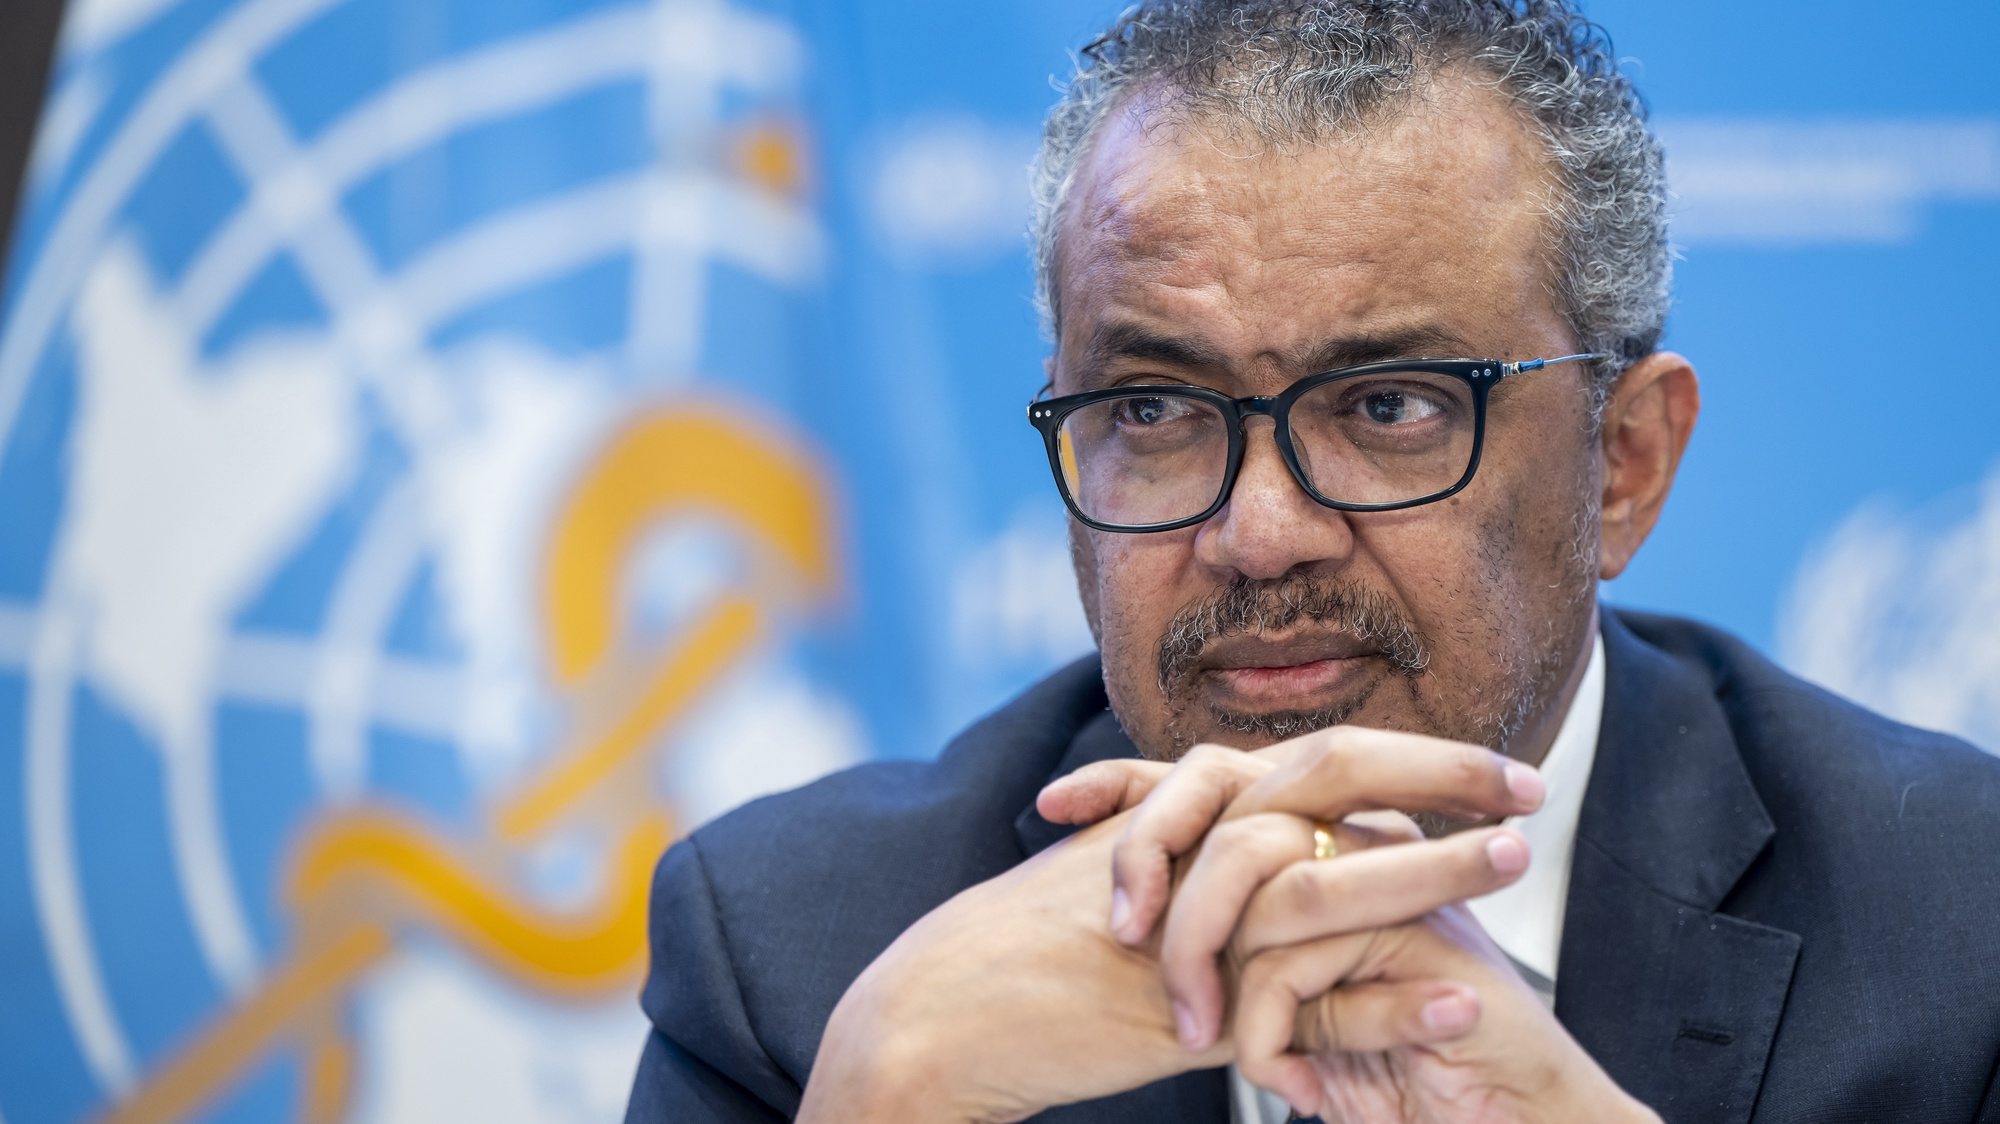 epa10365520 Director General of the World Health Organization (WHO) Tedros Adhanom Ghebreyesus speaks to journalists during a press conference organized by the Geneva Association of United Nations Correspondents (ACANU) at the WHO headquarters in Geneva, Switzerland, 14 December 2022.  EPA/MARTIAL TREZZINI